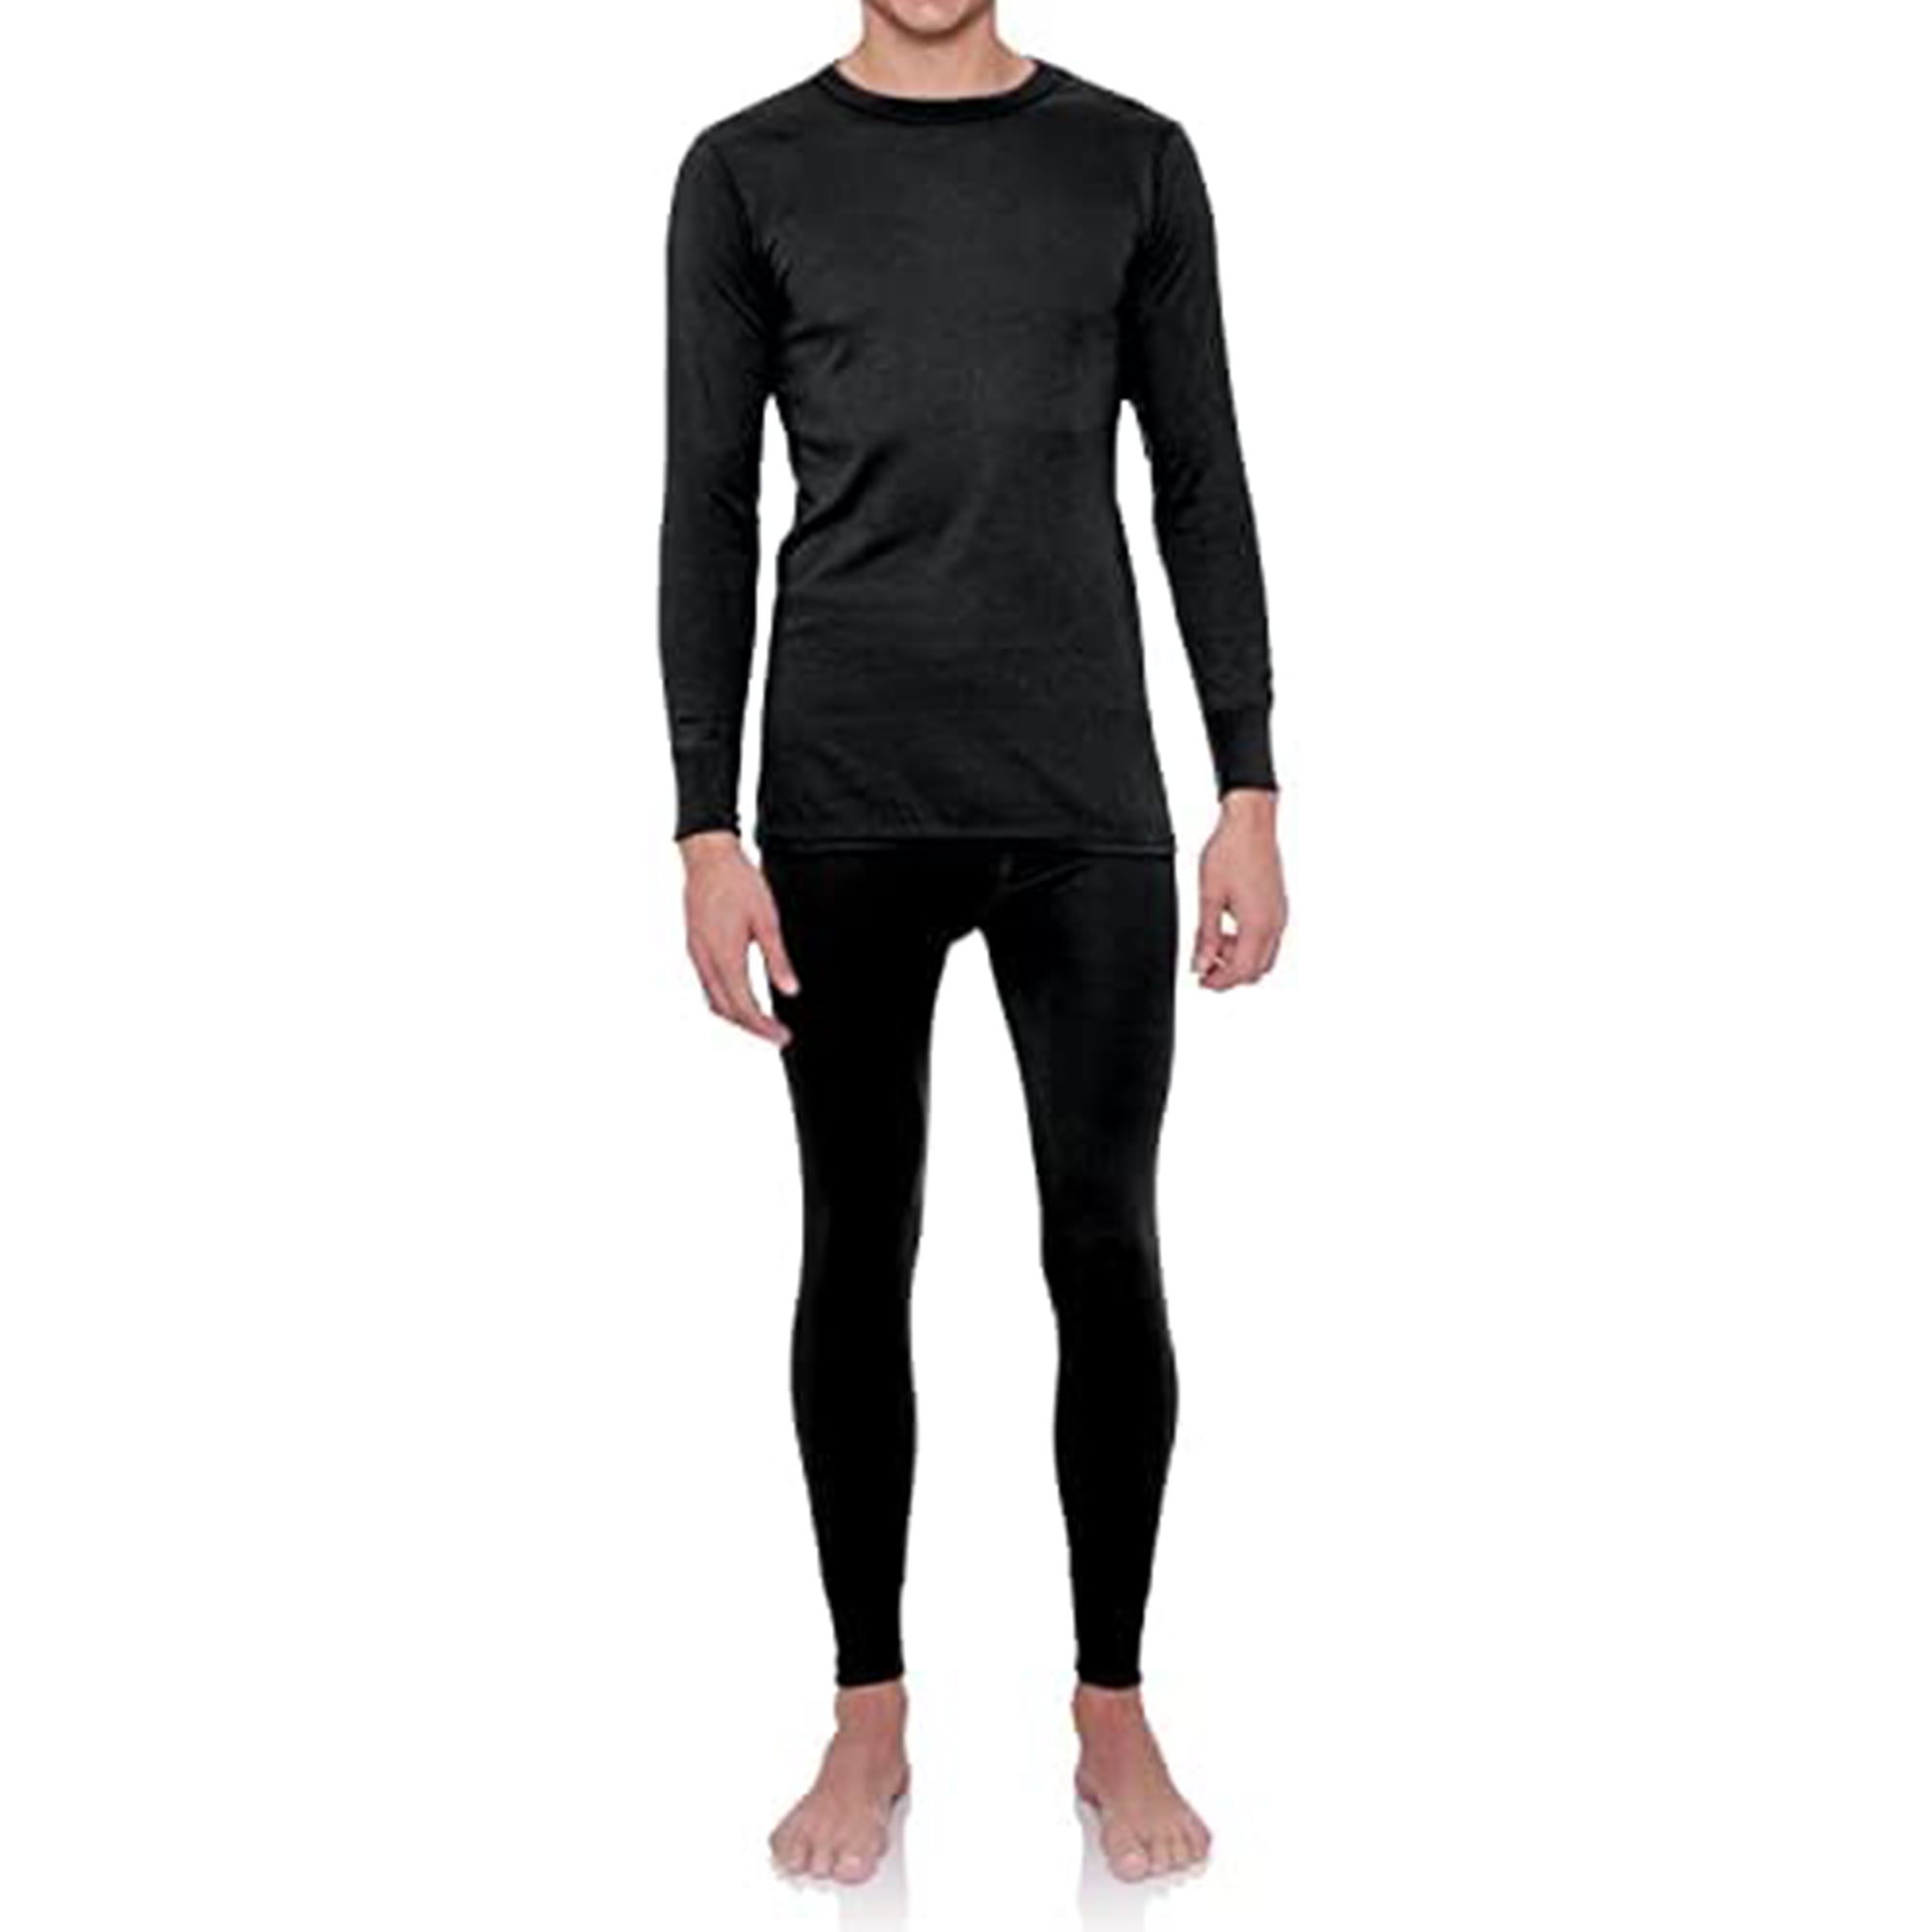 Rocky Men’s Thermal Underwear Set Insulated Top & Bottom Base Layer For ...